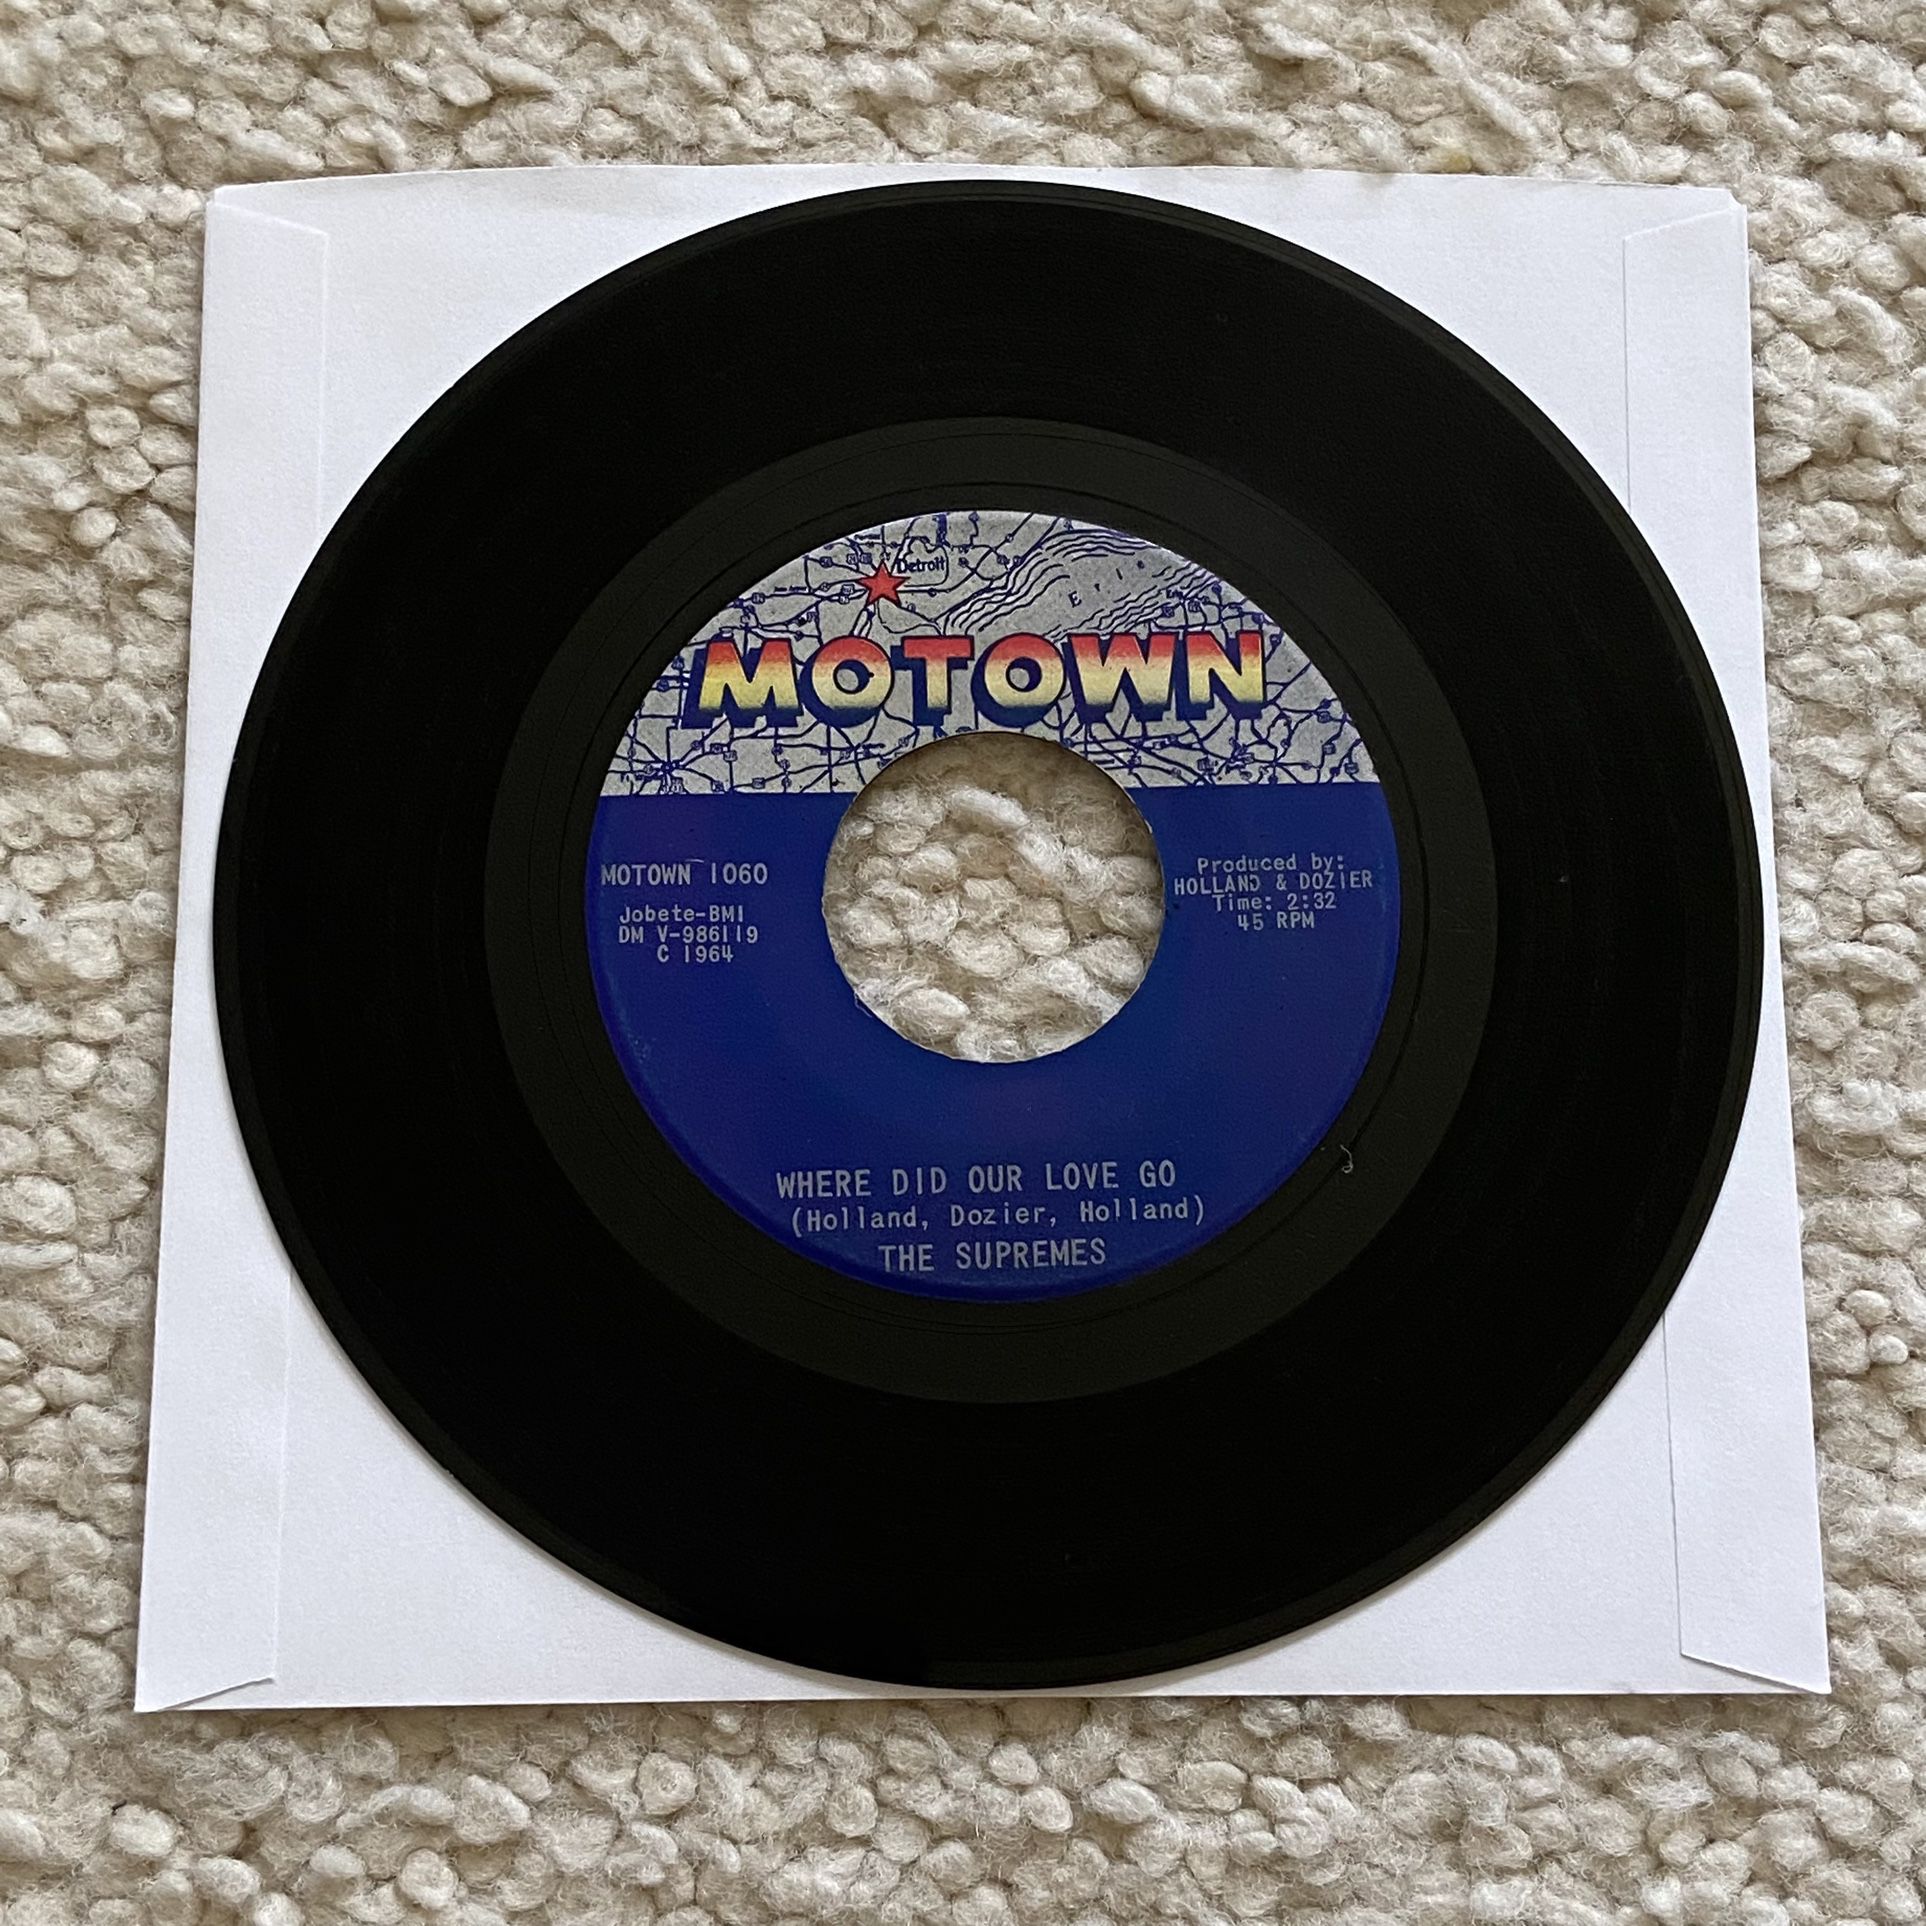 The Supremes “Where Did Our Love Go” Vinyl 7” Single 1964 Motown Records Early Original Pressing Collector’s Copy Soul